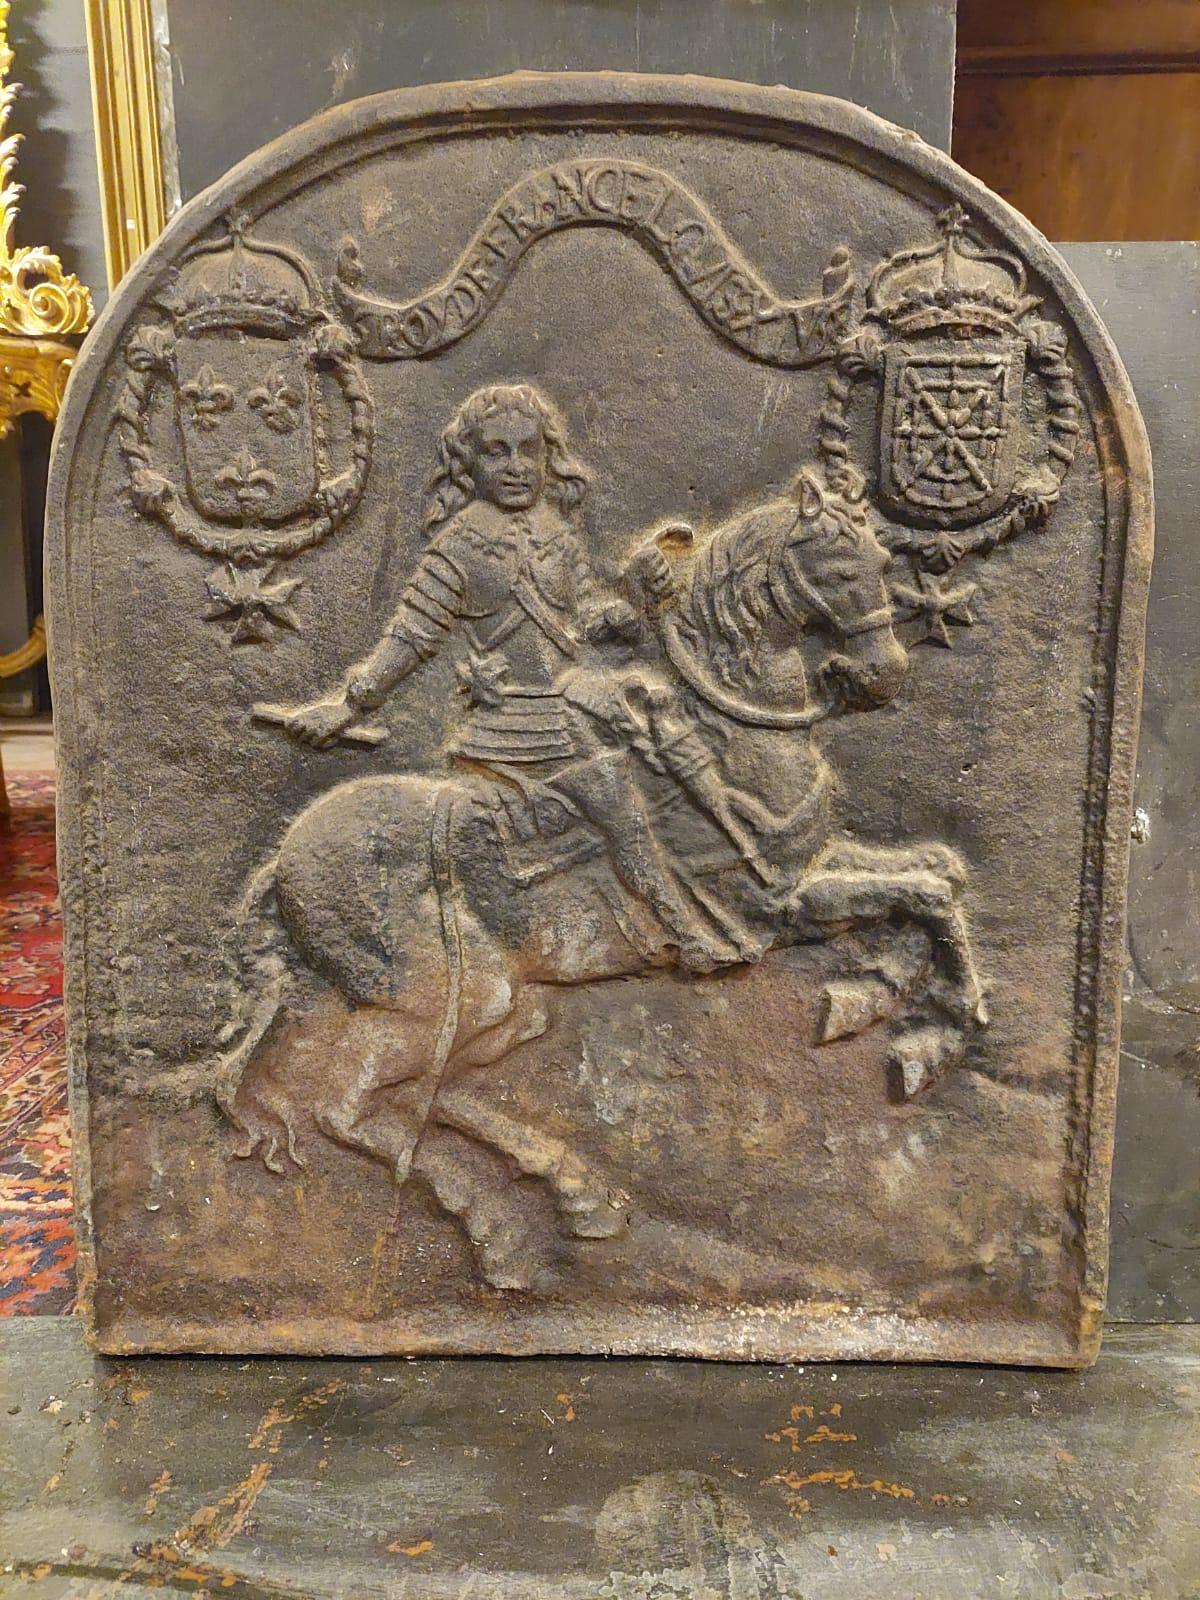 Antique cast iron plate representing the Sun King on horseback, with the inscription 